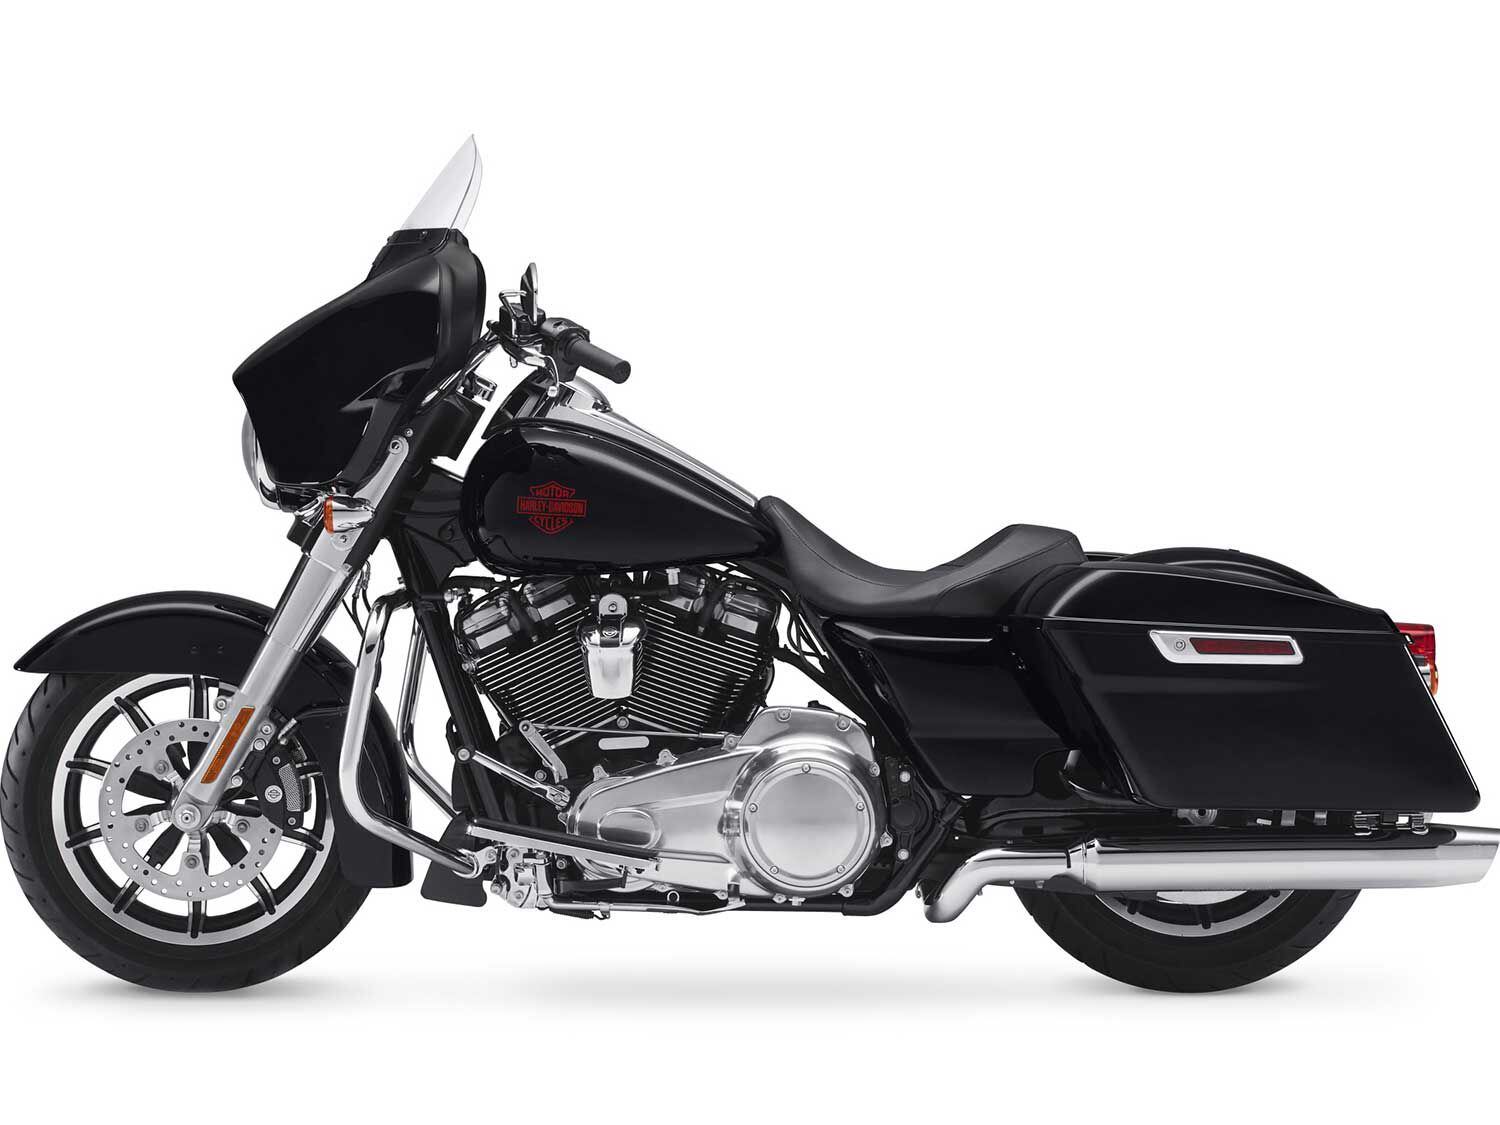 The E-Glide Standard gets blacked out parts contrasted by distinctive chrome accents and polished covers.